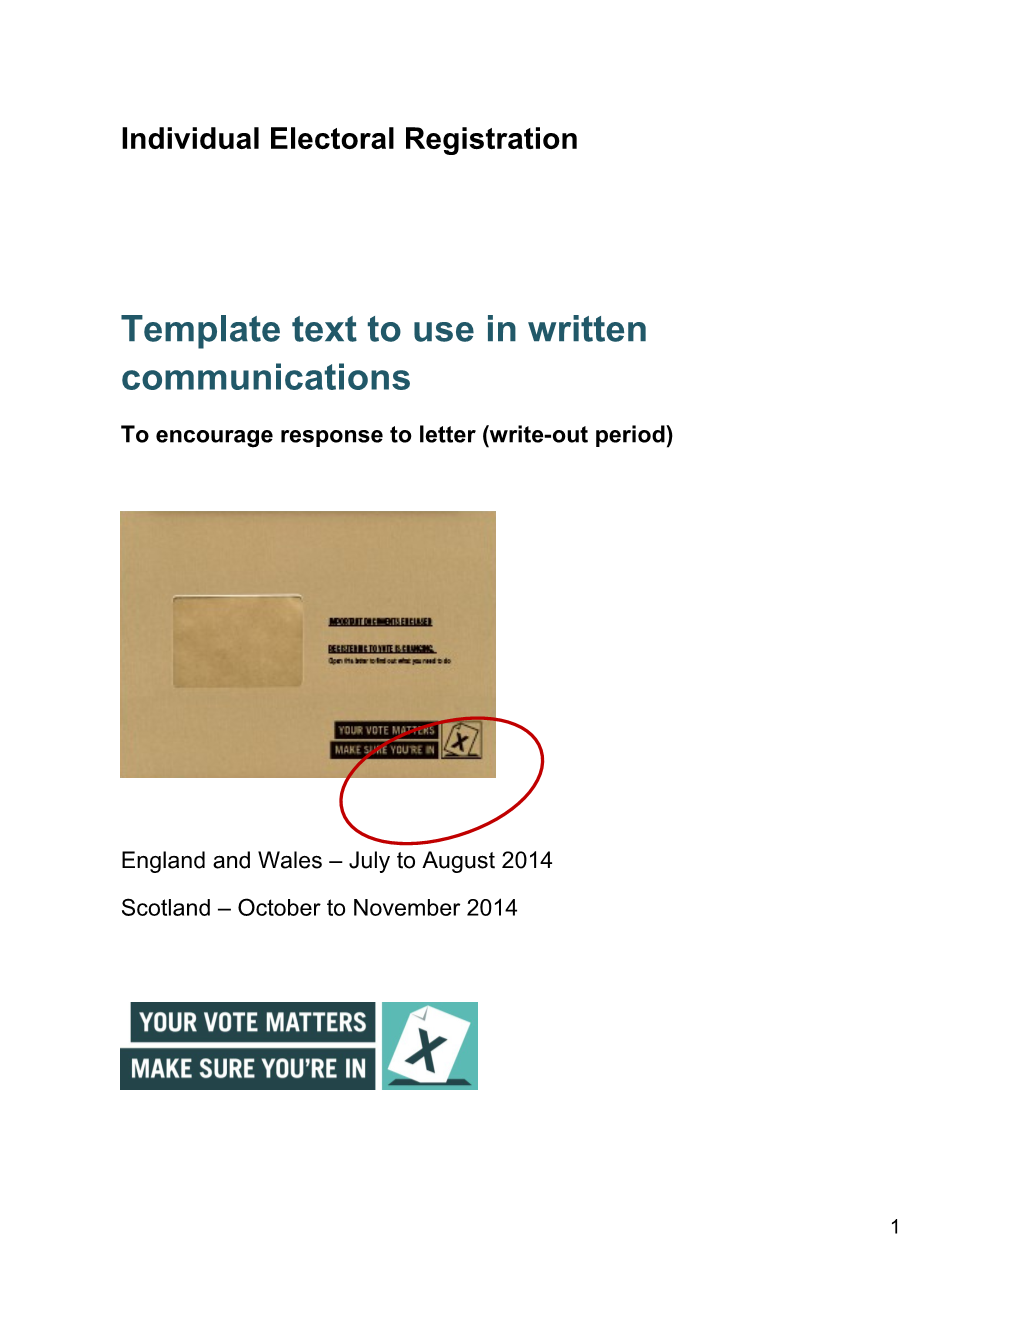 Template Text to Use in Written Communications